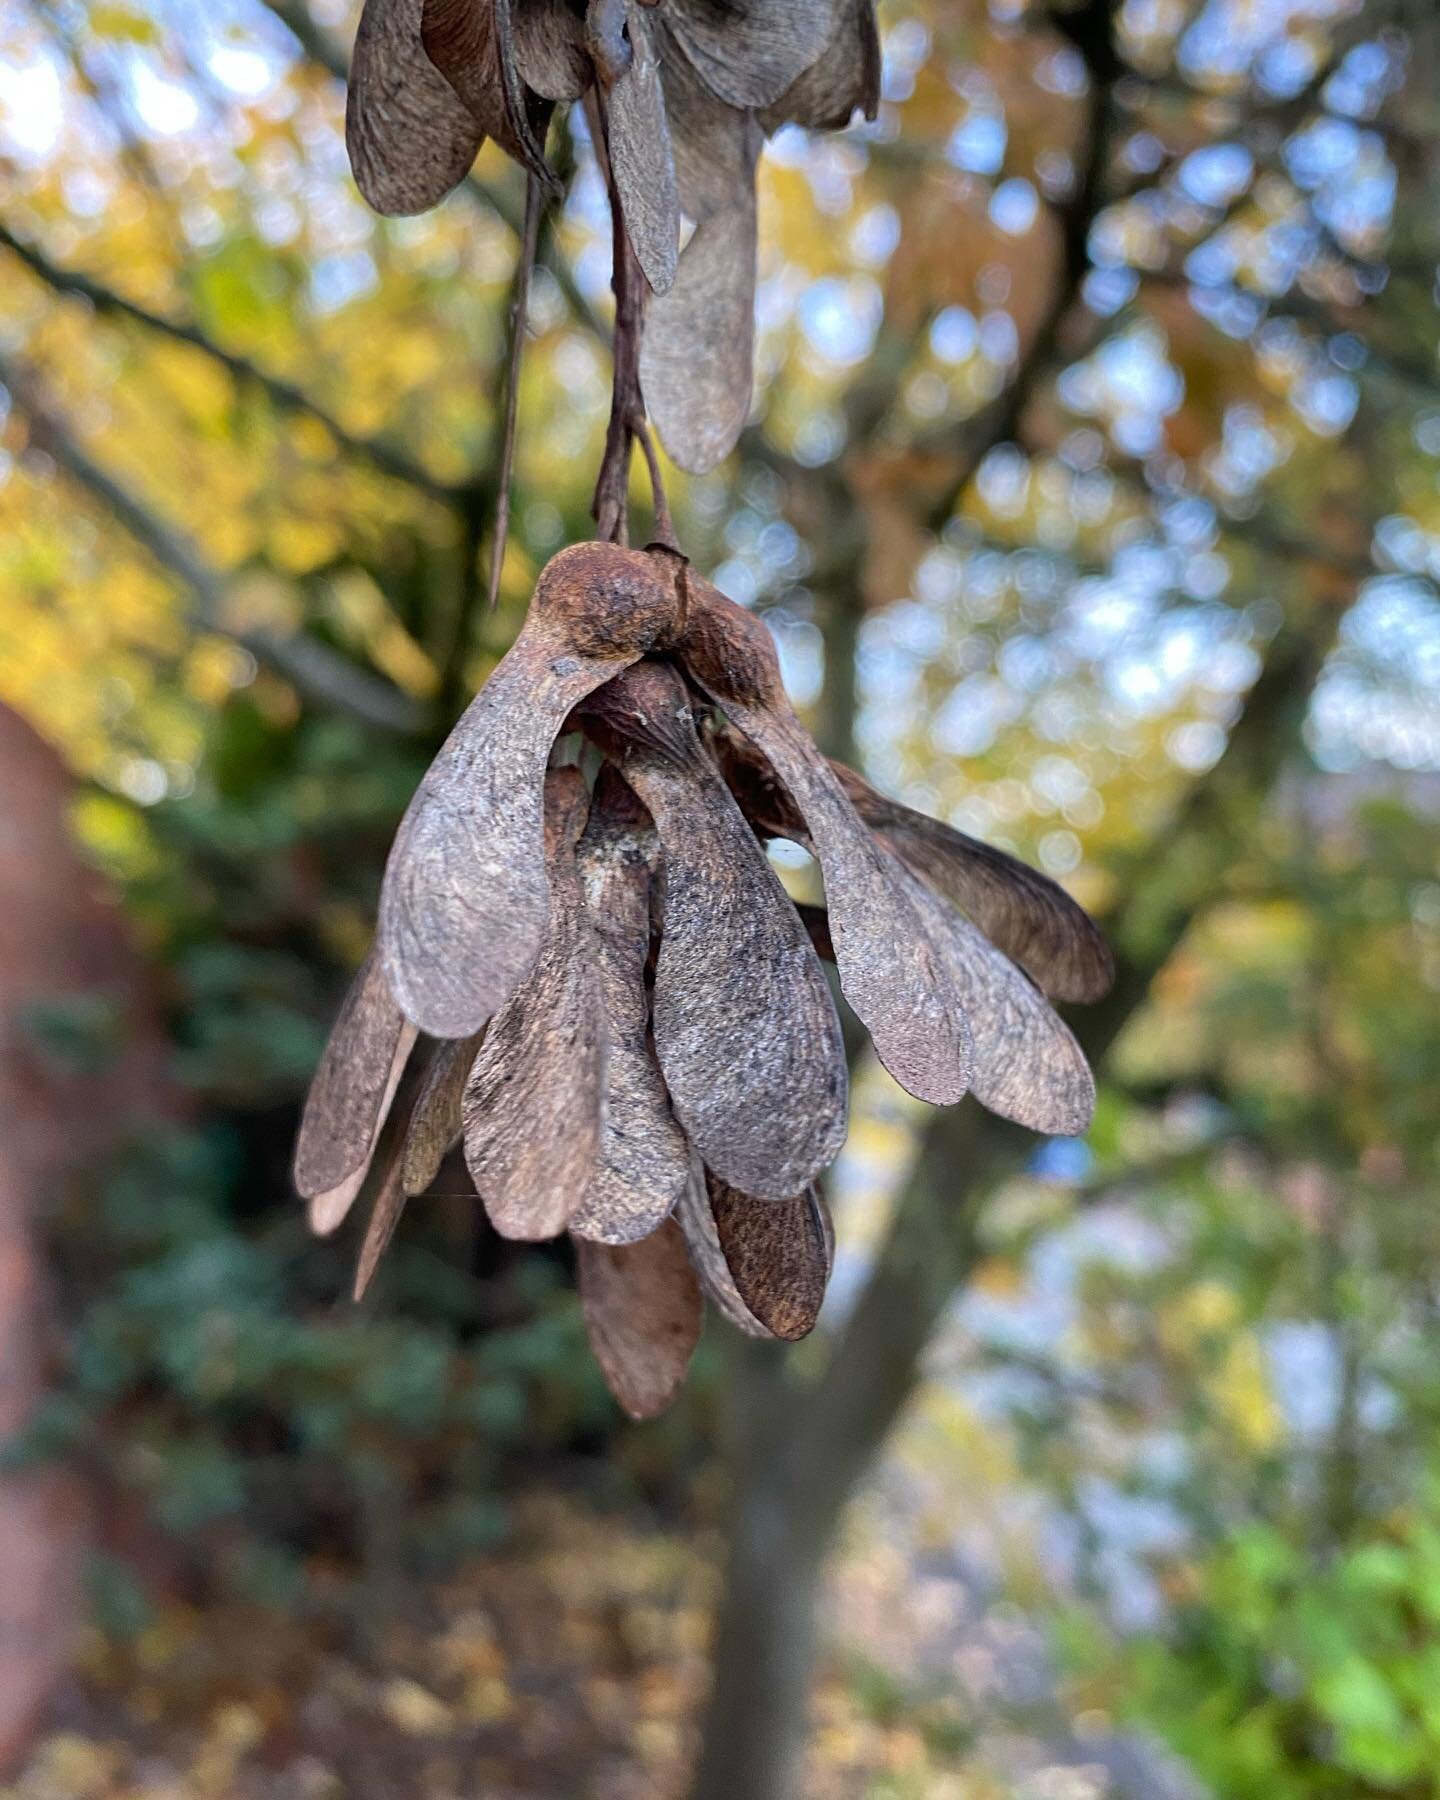 ⚠️ Sycamore poisoning ⚠️

November is typically the month that we worry about Sycamore Poisoning. This year there is an increase in the number of cases being seen in the UK. This is likely due to the conditions being just right for hypoglycin A (the 